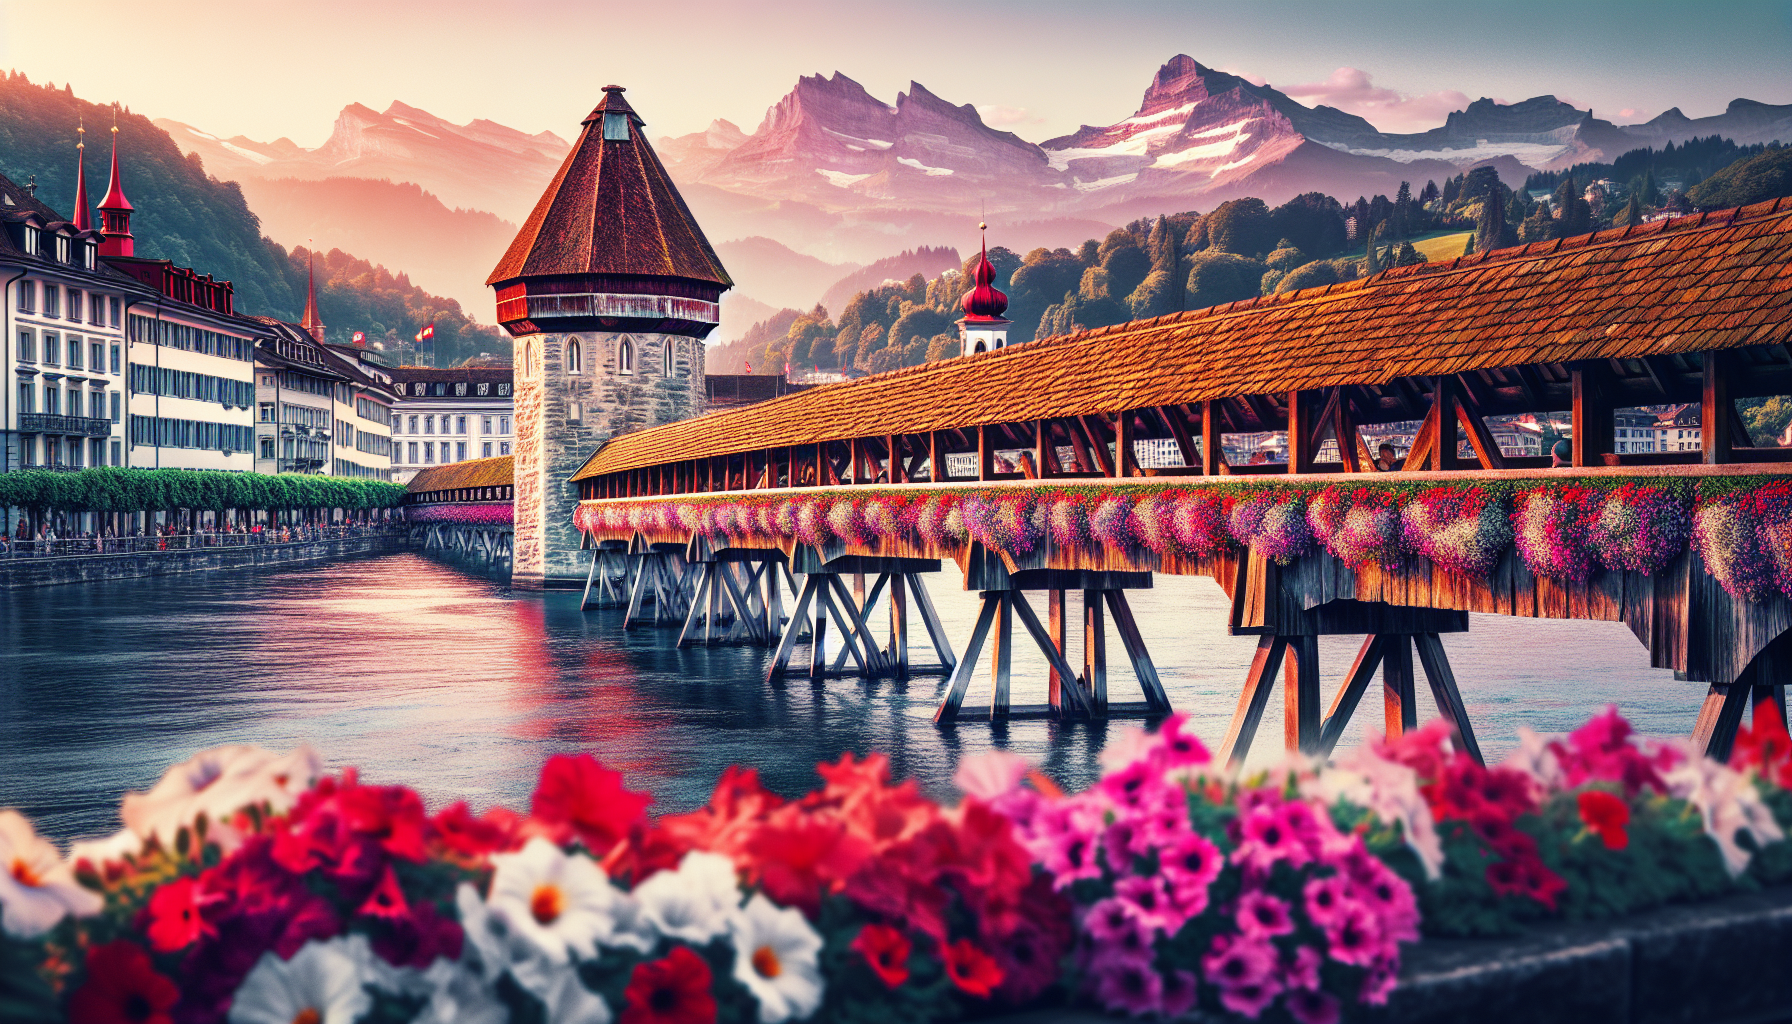 Lucerne, Switzerland: Medieval buildings, Chapel Bridge, and the Music Wall and Towers